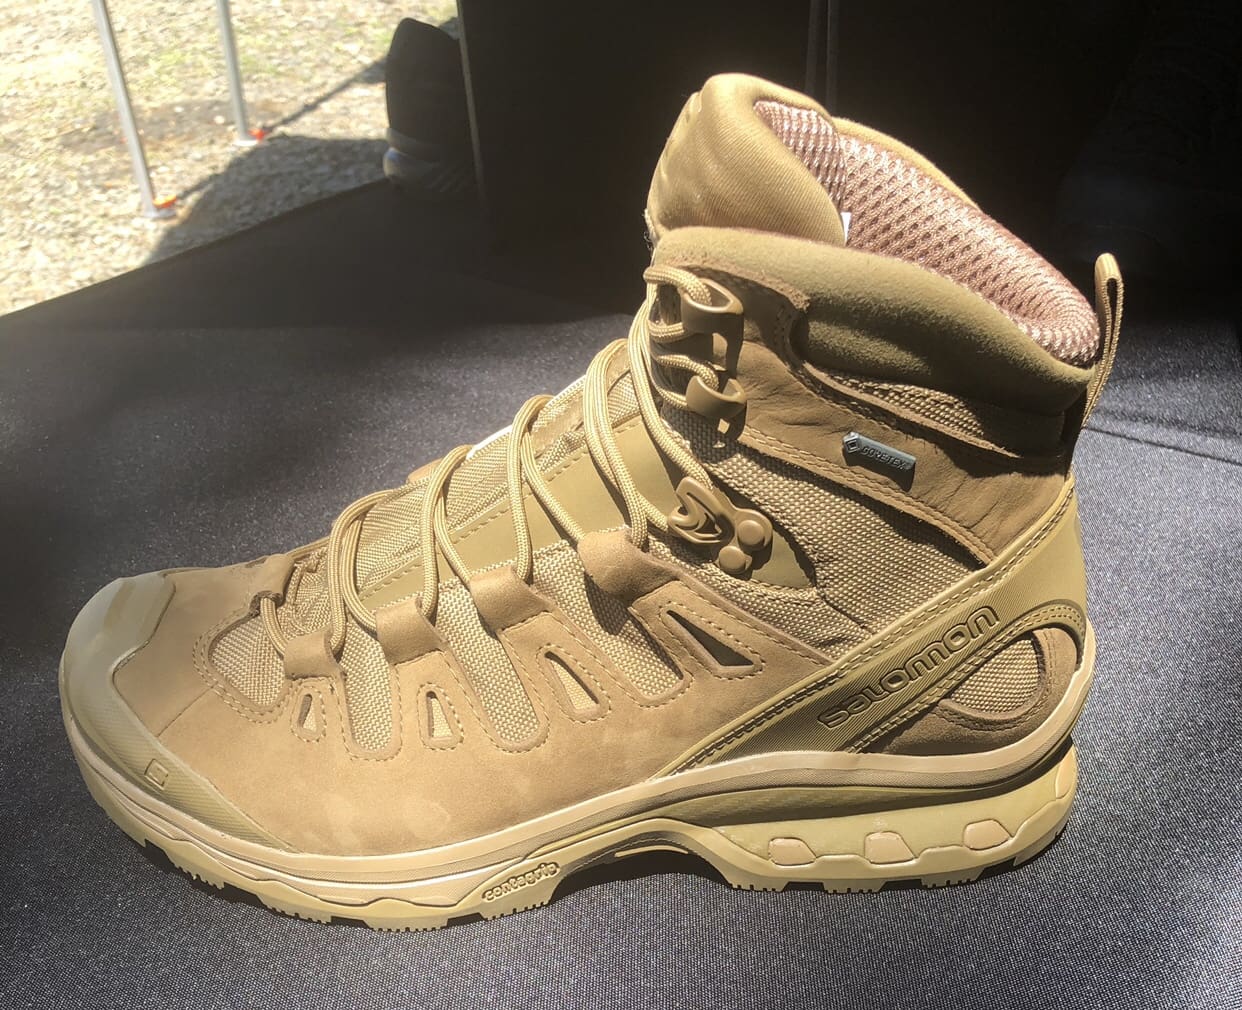 Salomon Forces – Trade Compliant Boots Now Available - Soldier Systems Daily